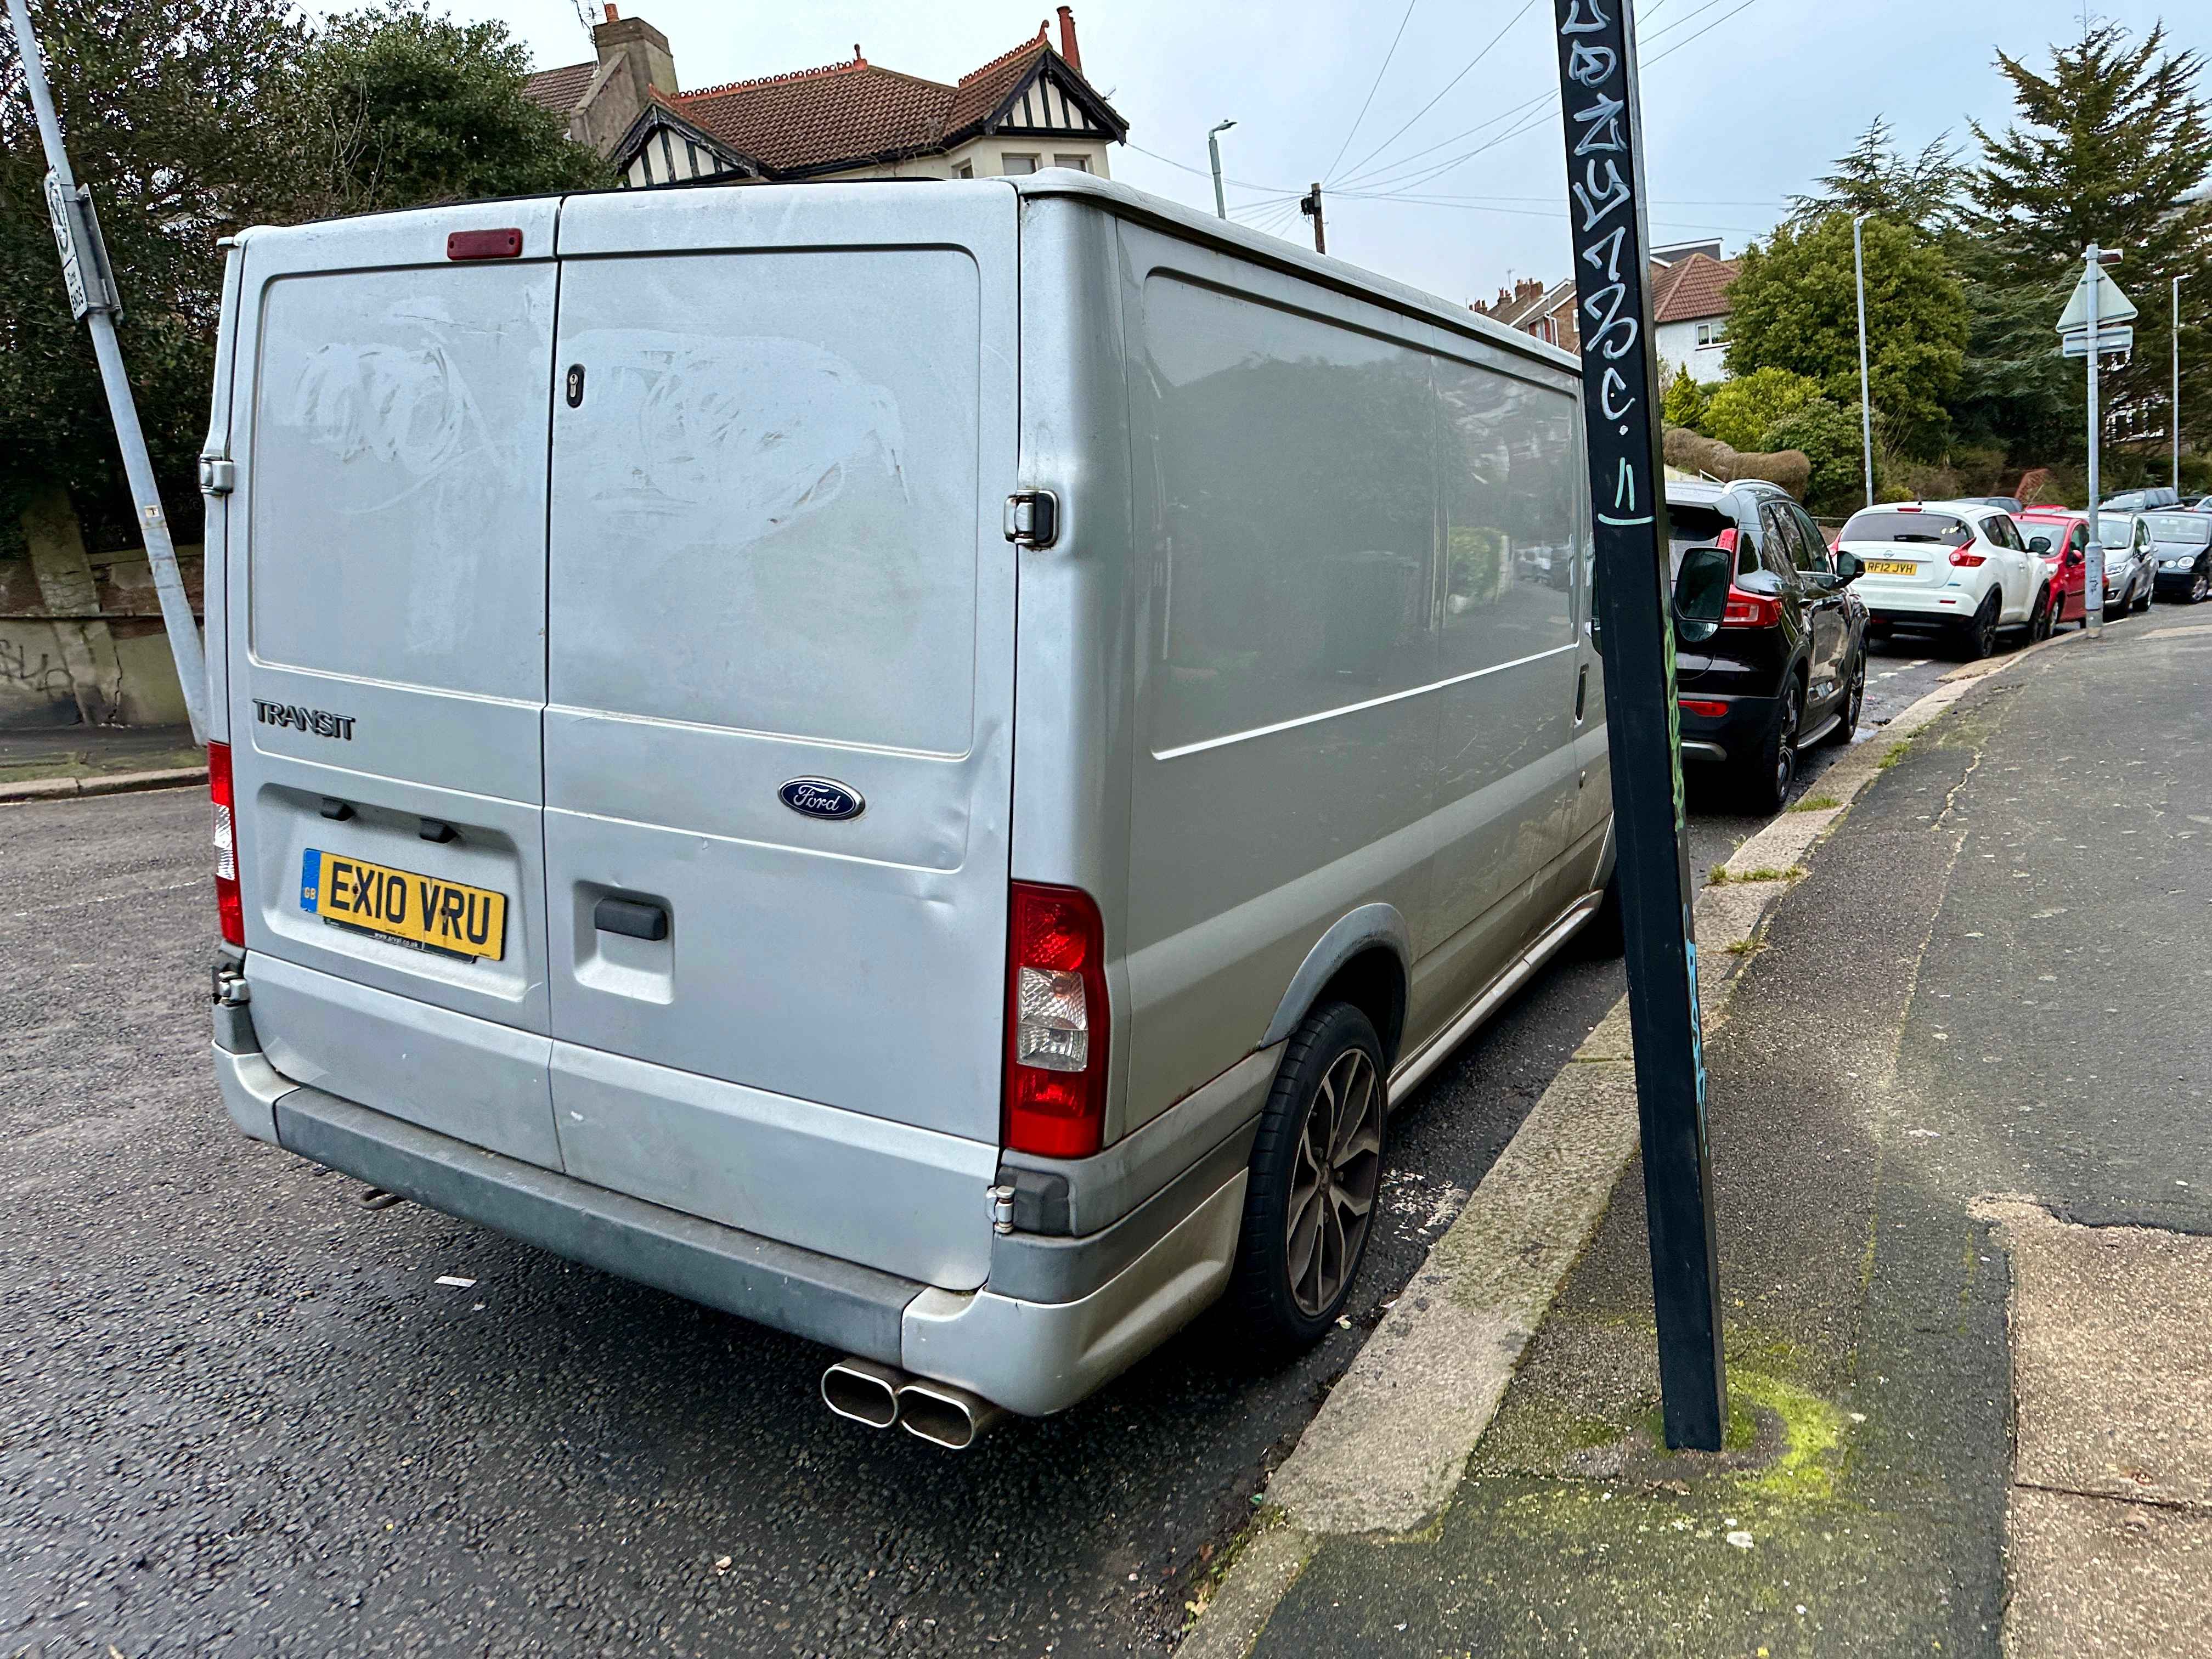 Photograph of EX10 VRU - a Silver Ford Transit parked in Hollingdean by a non-resident. The ninth of ten photographs supplied by the residents of Hollingdean.